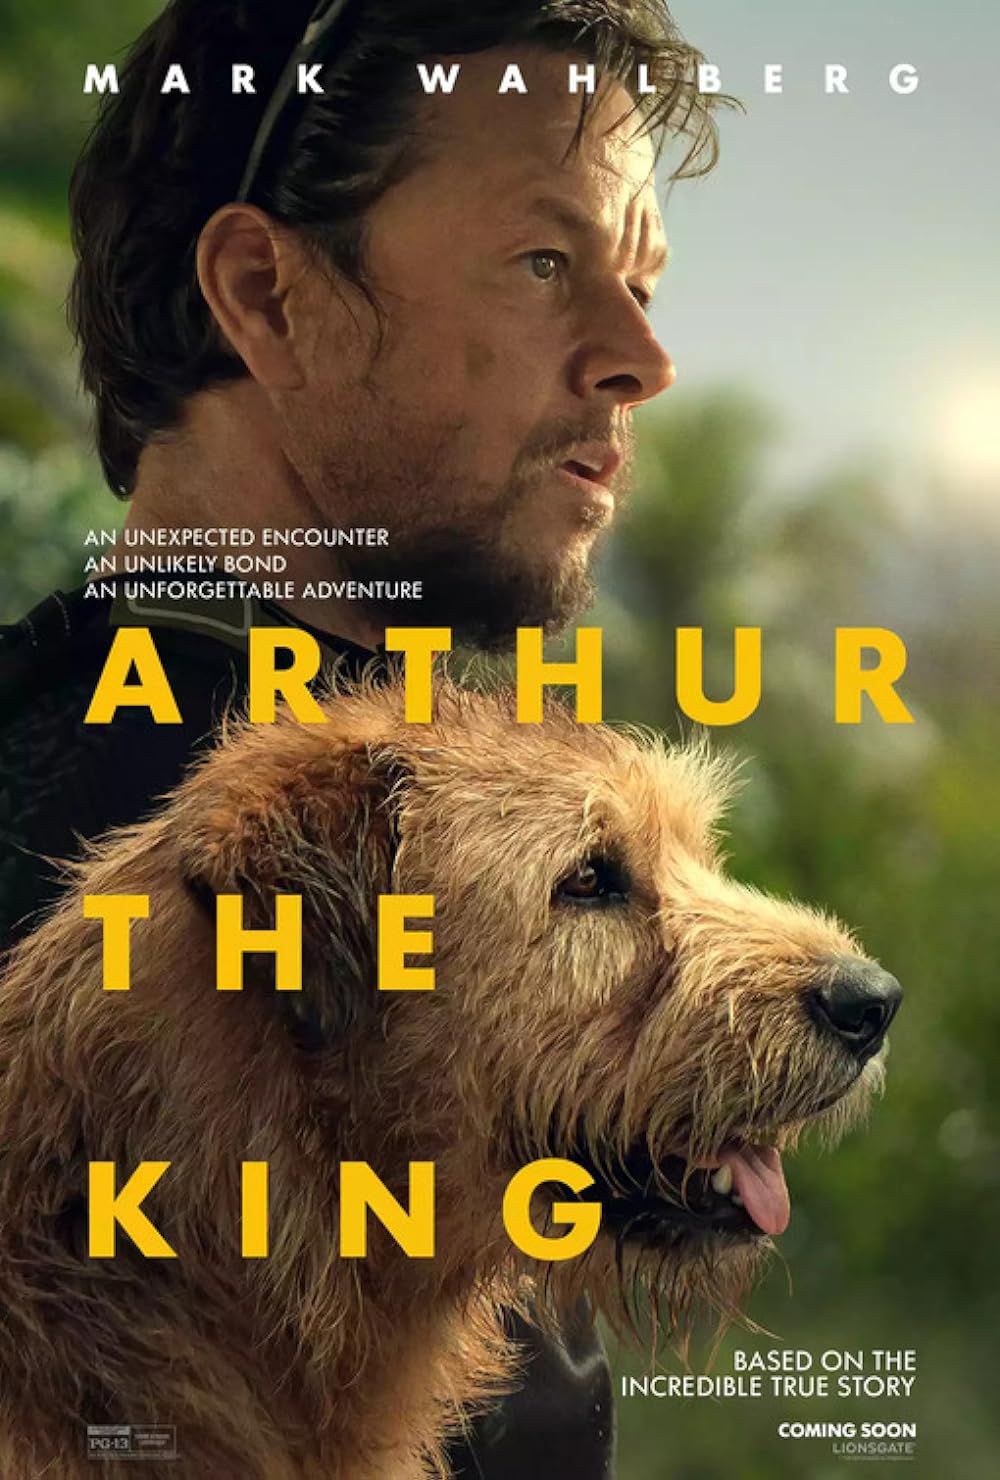 Arthur The King (July 5, Lionsgate Play)Arthur the King, based on a true story, stars Mark Wahlberg as Michael Light, an adventure racer who forms an unbreakable bond with a stray dog named Arthur during a grueling race in the Dominican Republic.